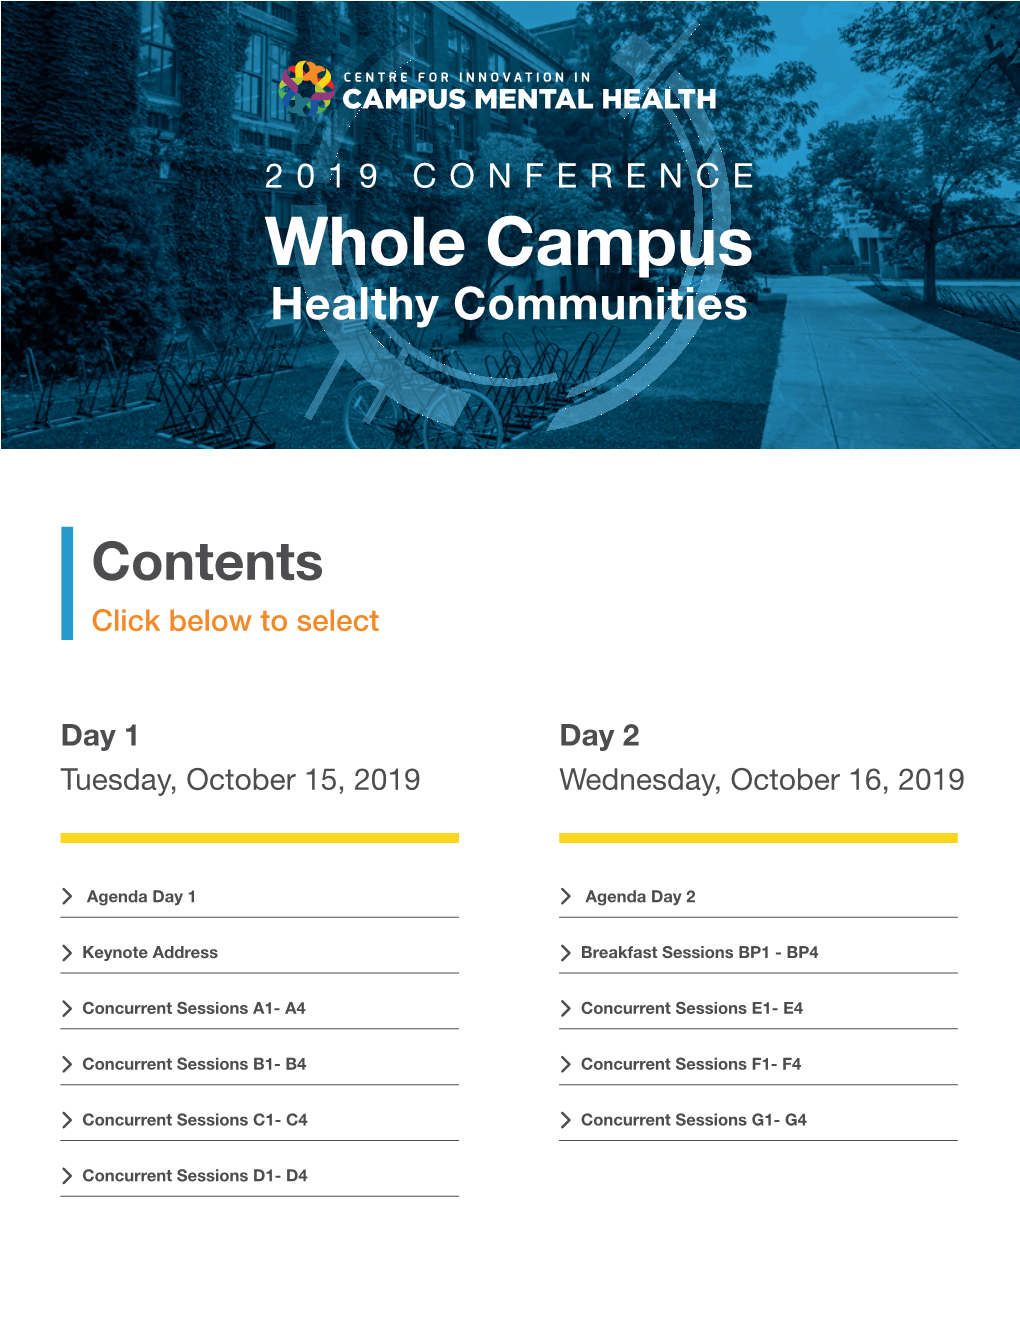 Whole Campus Healthy Communities